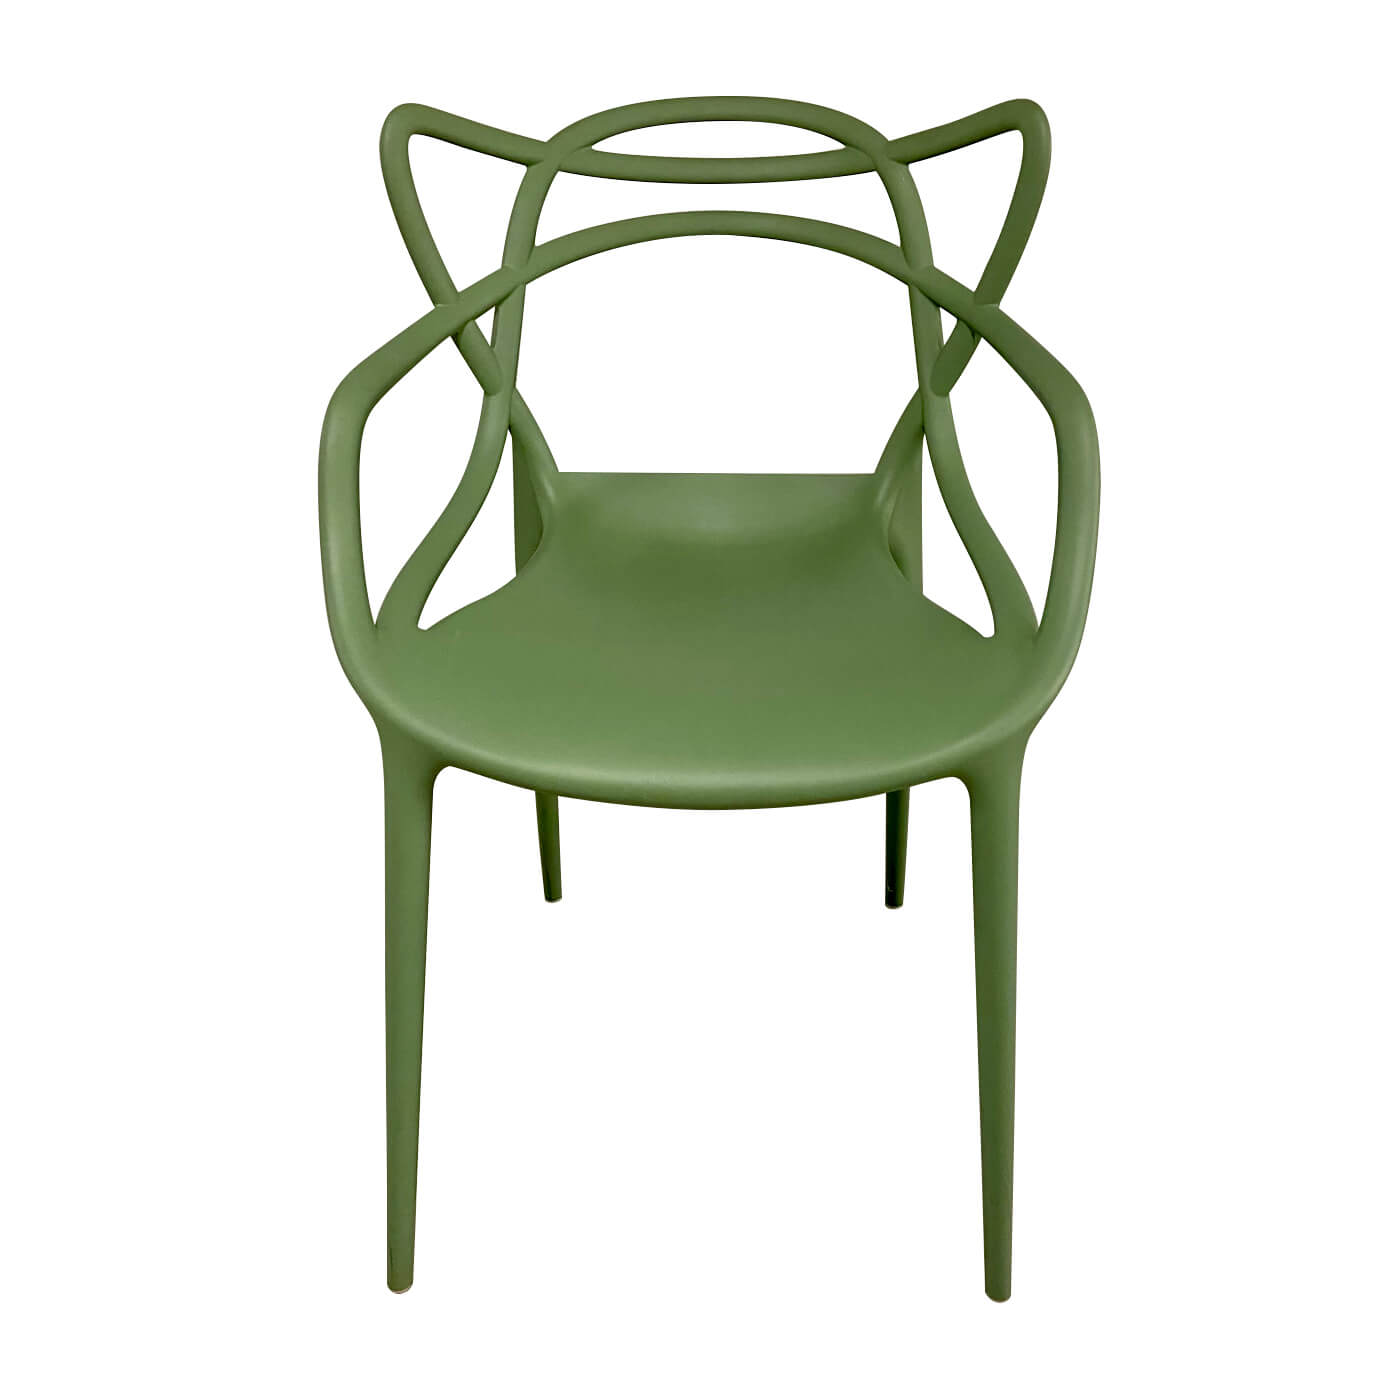 Kartell Masters dining chairs for outdoor or indoor use. Designer outdoor furniture second hand on Two Design Lovers.